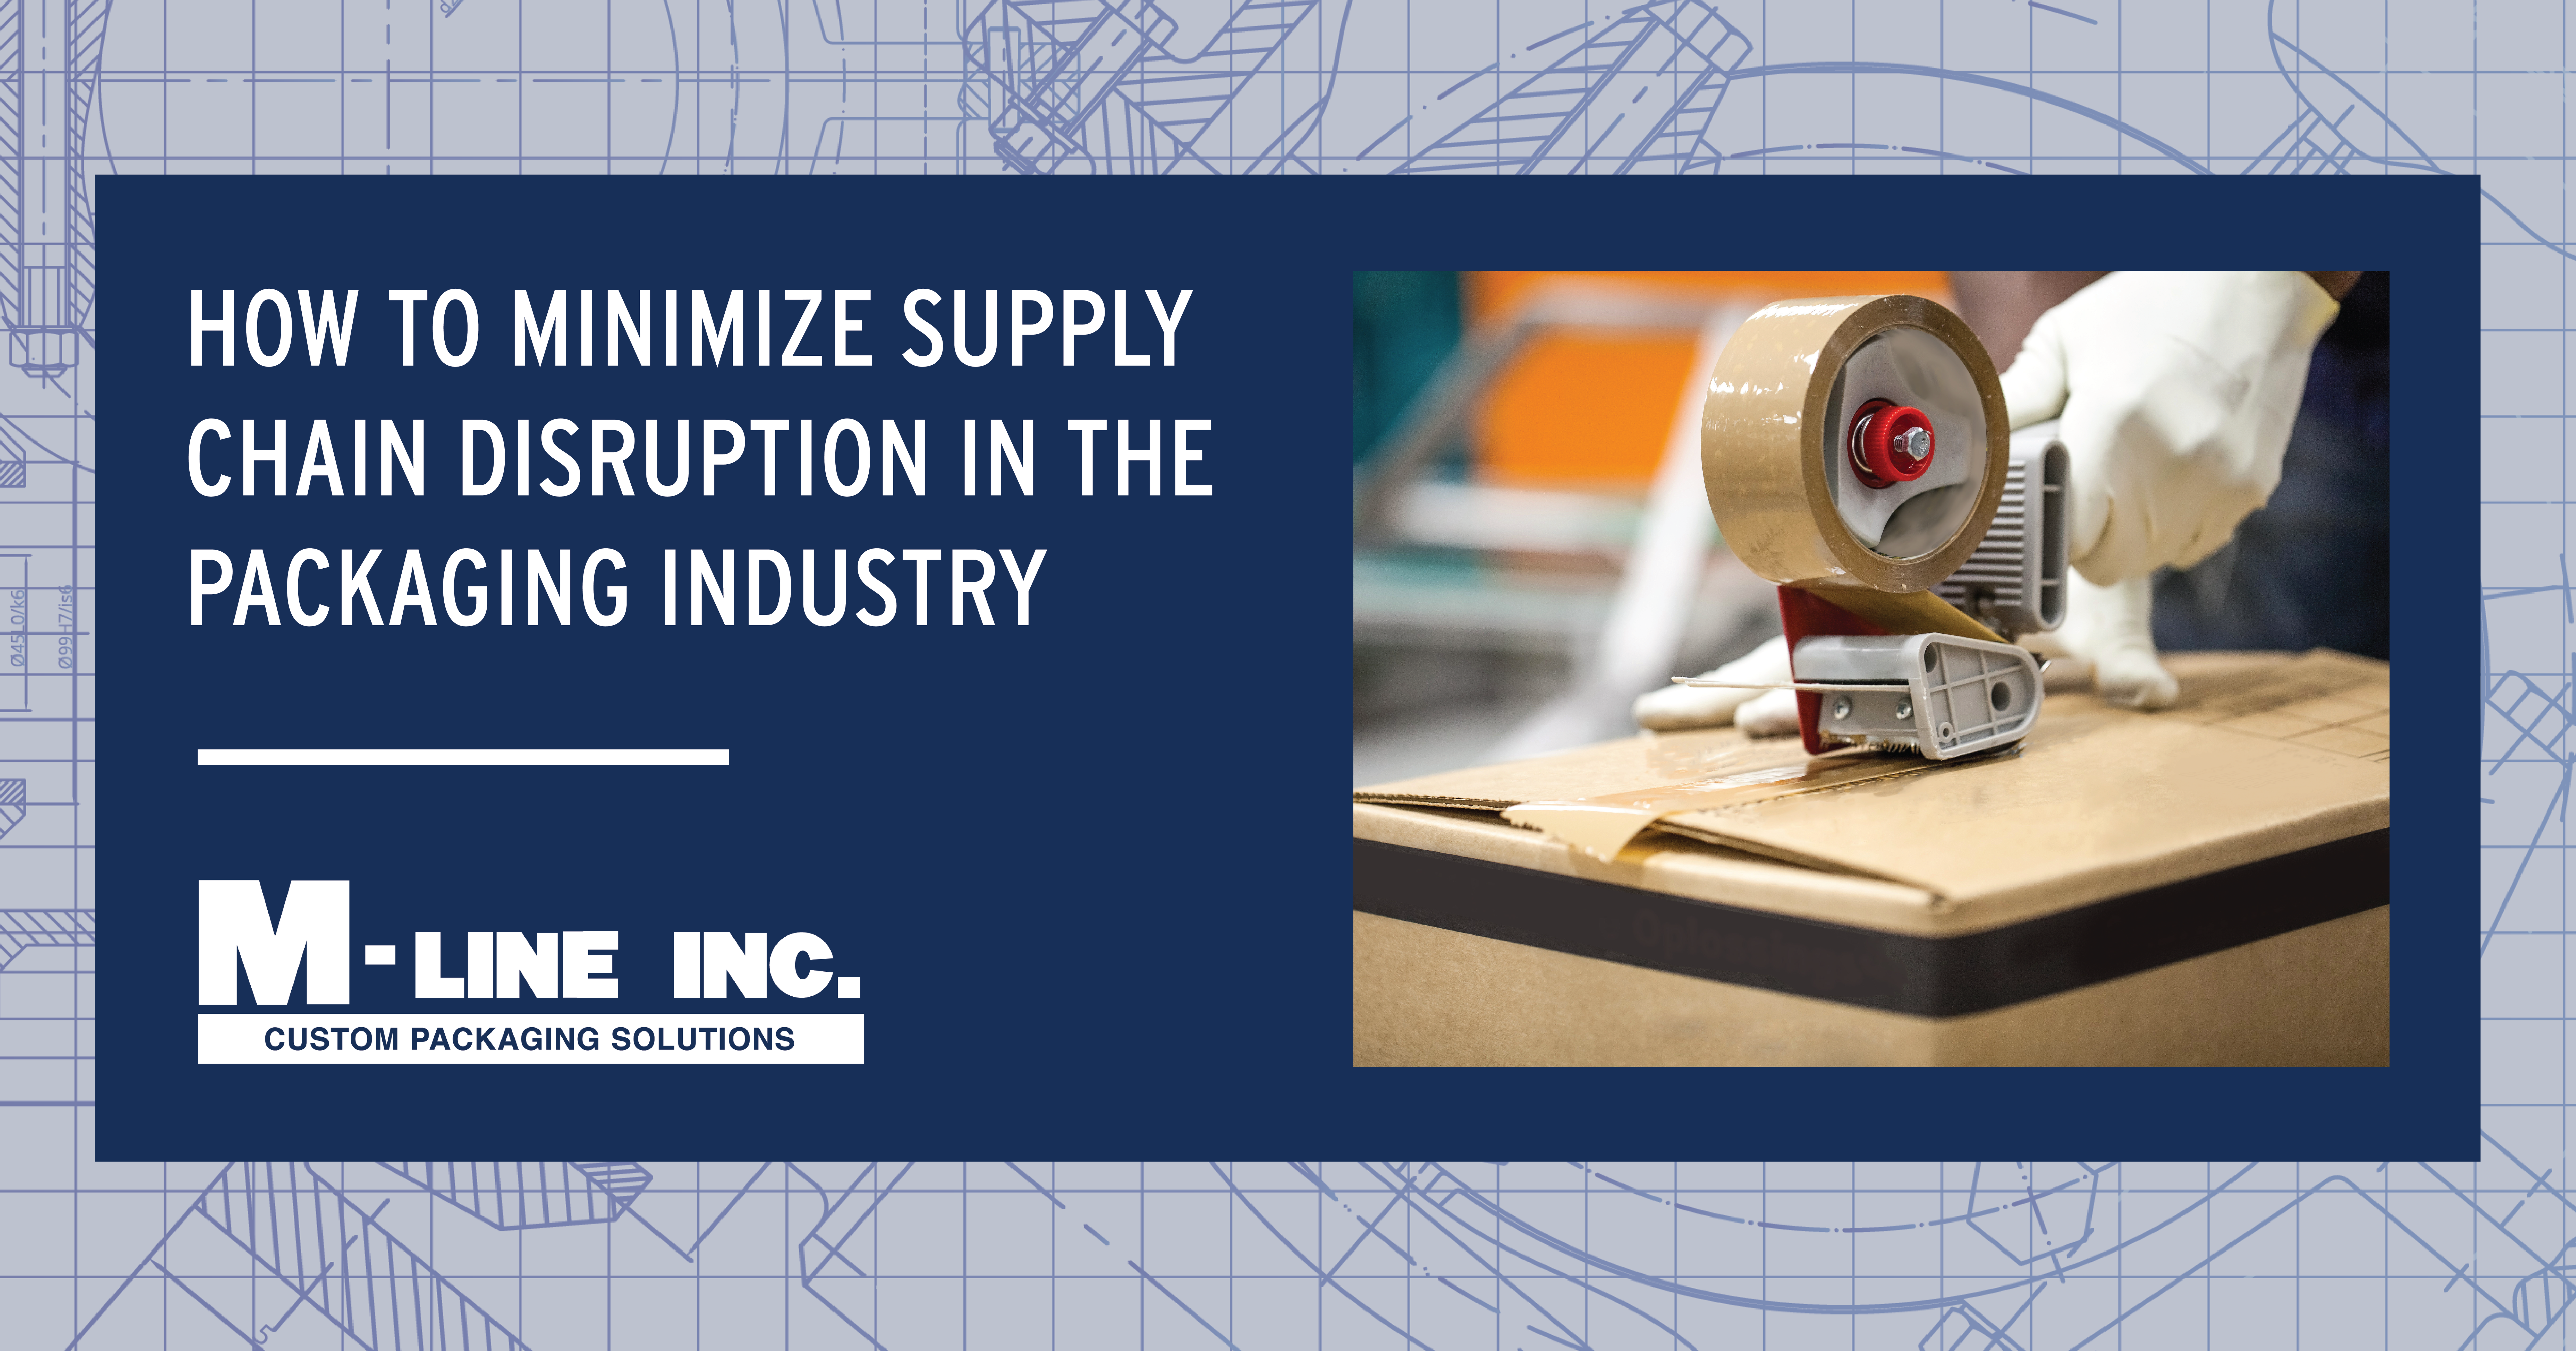 How to Minimize Supply Chain Disruption in the Packaging Industry